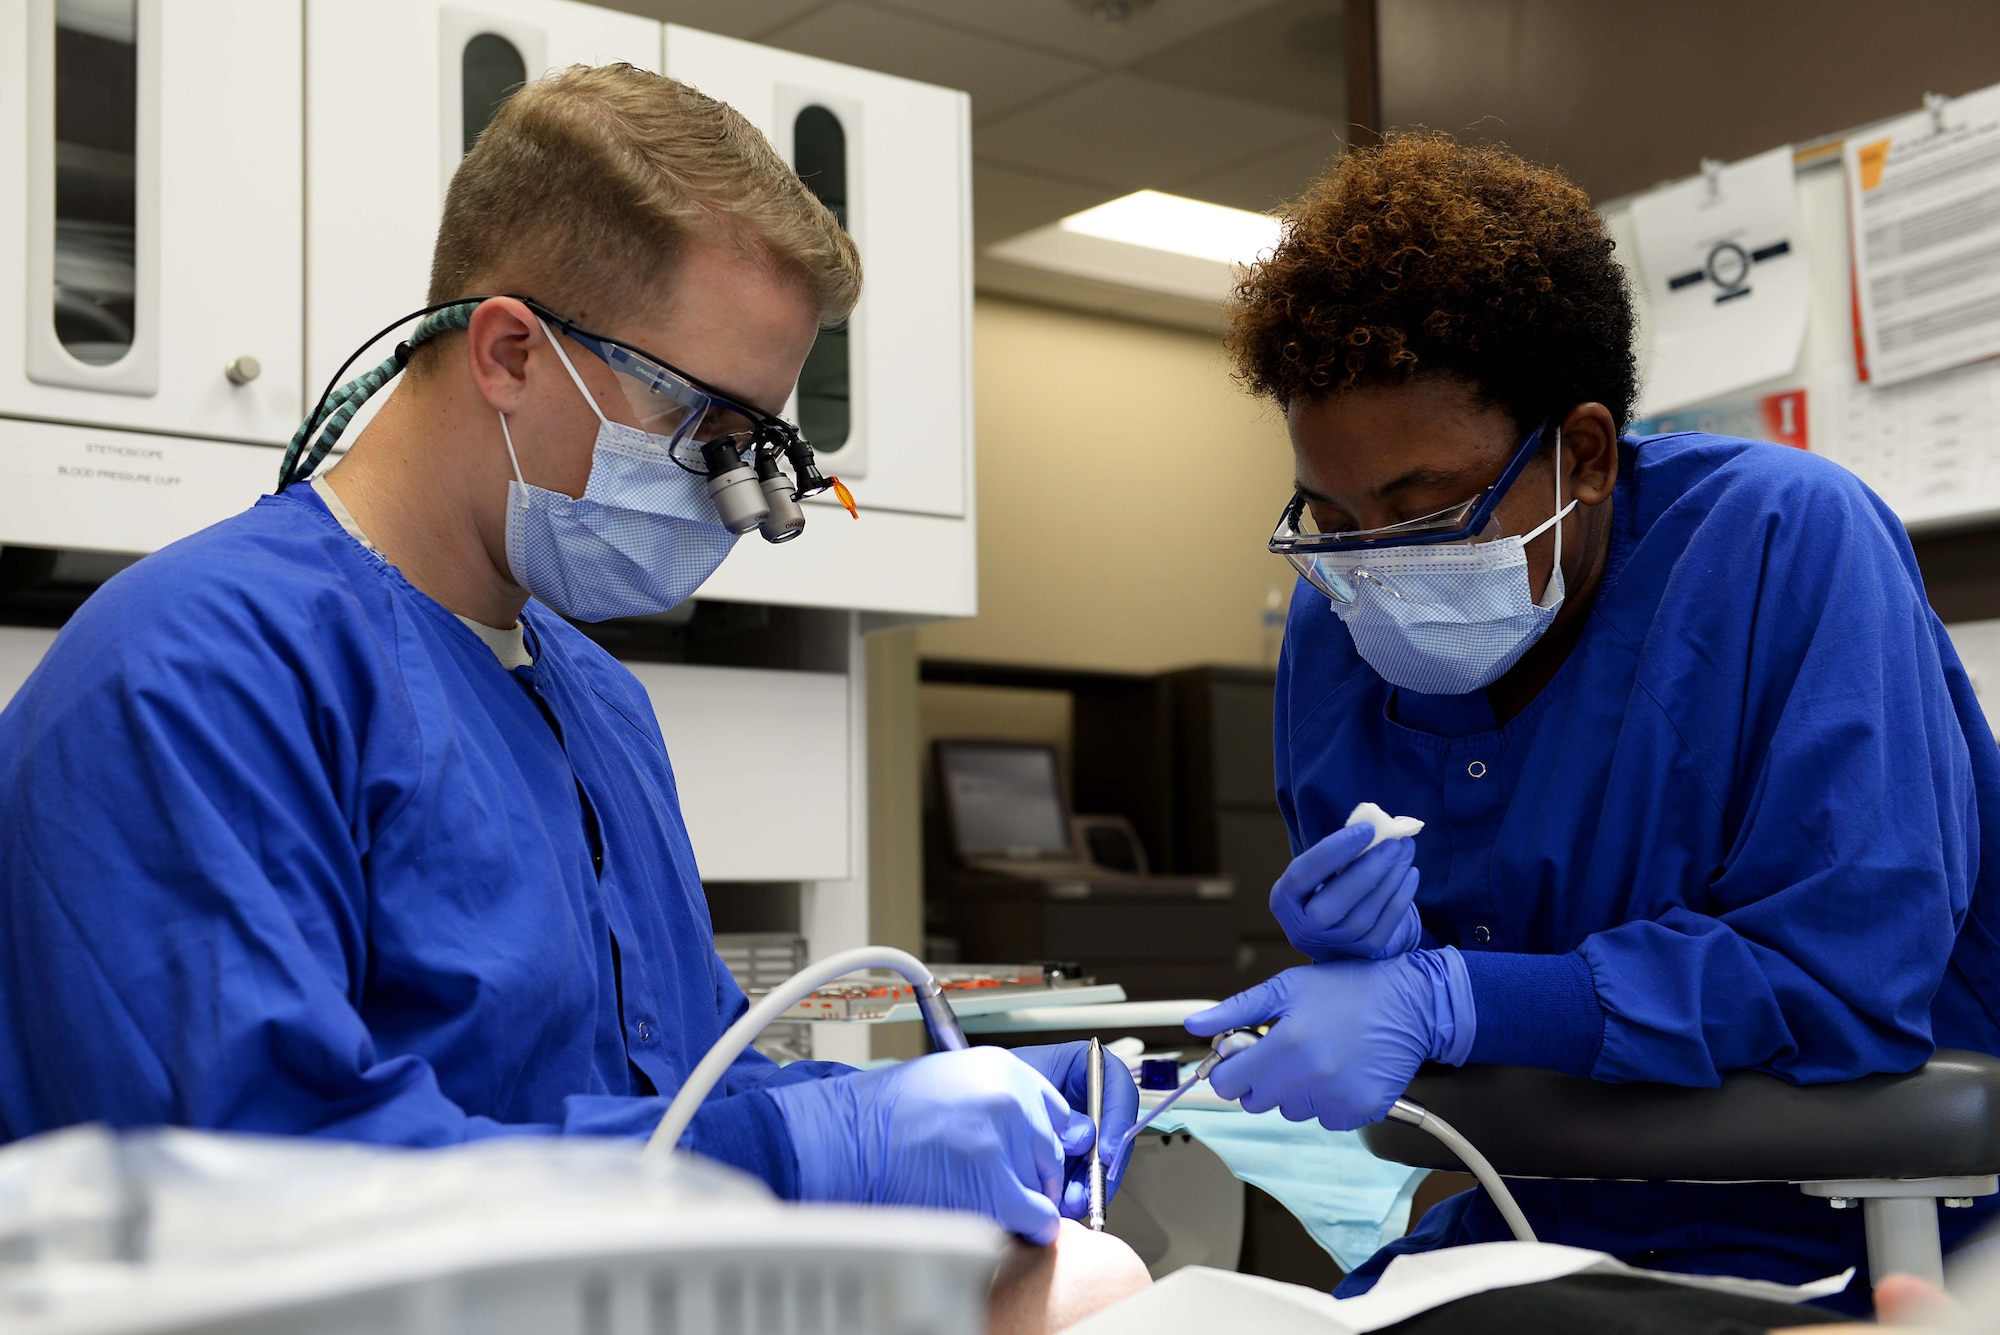 Capt. Travis Wagner, 14th Medical Operations Squadron general dentist, and Shaneka Hubbard, 14th MDOS dental assistant, operate on a patient Nov. 7, 2018, on Columbus Air Force Base, Mississippi. The Columbus AFB dental clinic works to keep the dental health of every patient in the best condition possible and is highly keen on aiding Airmen in the best preventative oral habits. (U.S. Air Force photo by Airman Hannah Bean)